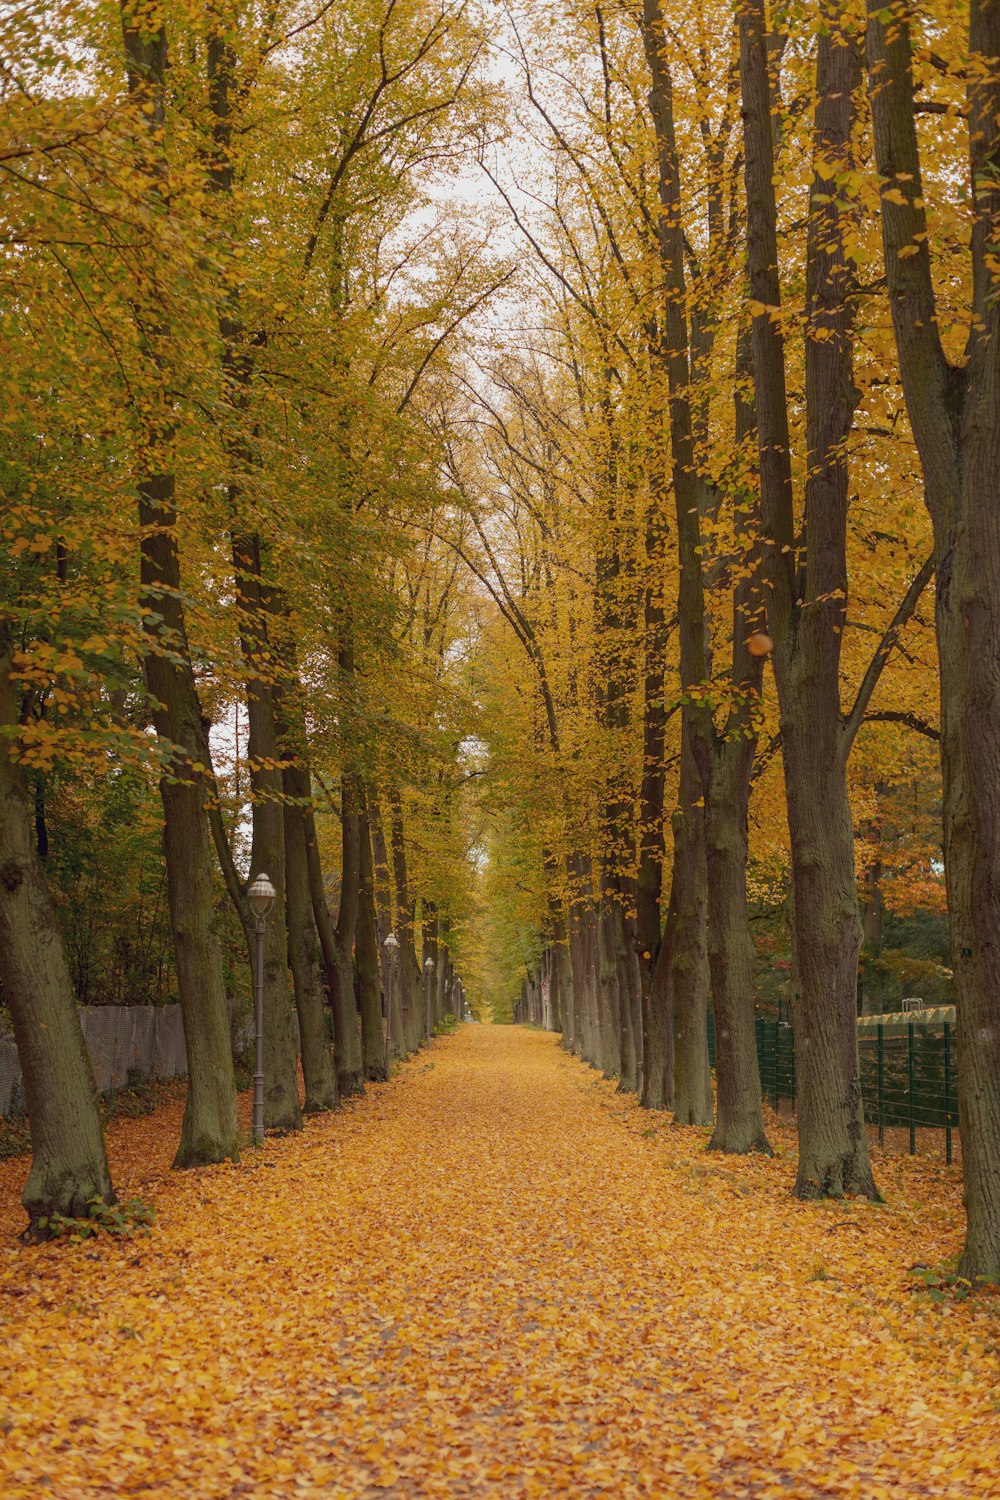 a tree lined road with yellow leaves on the ground